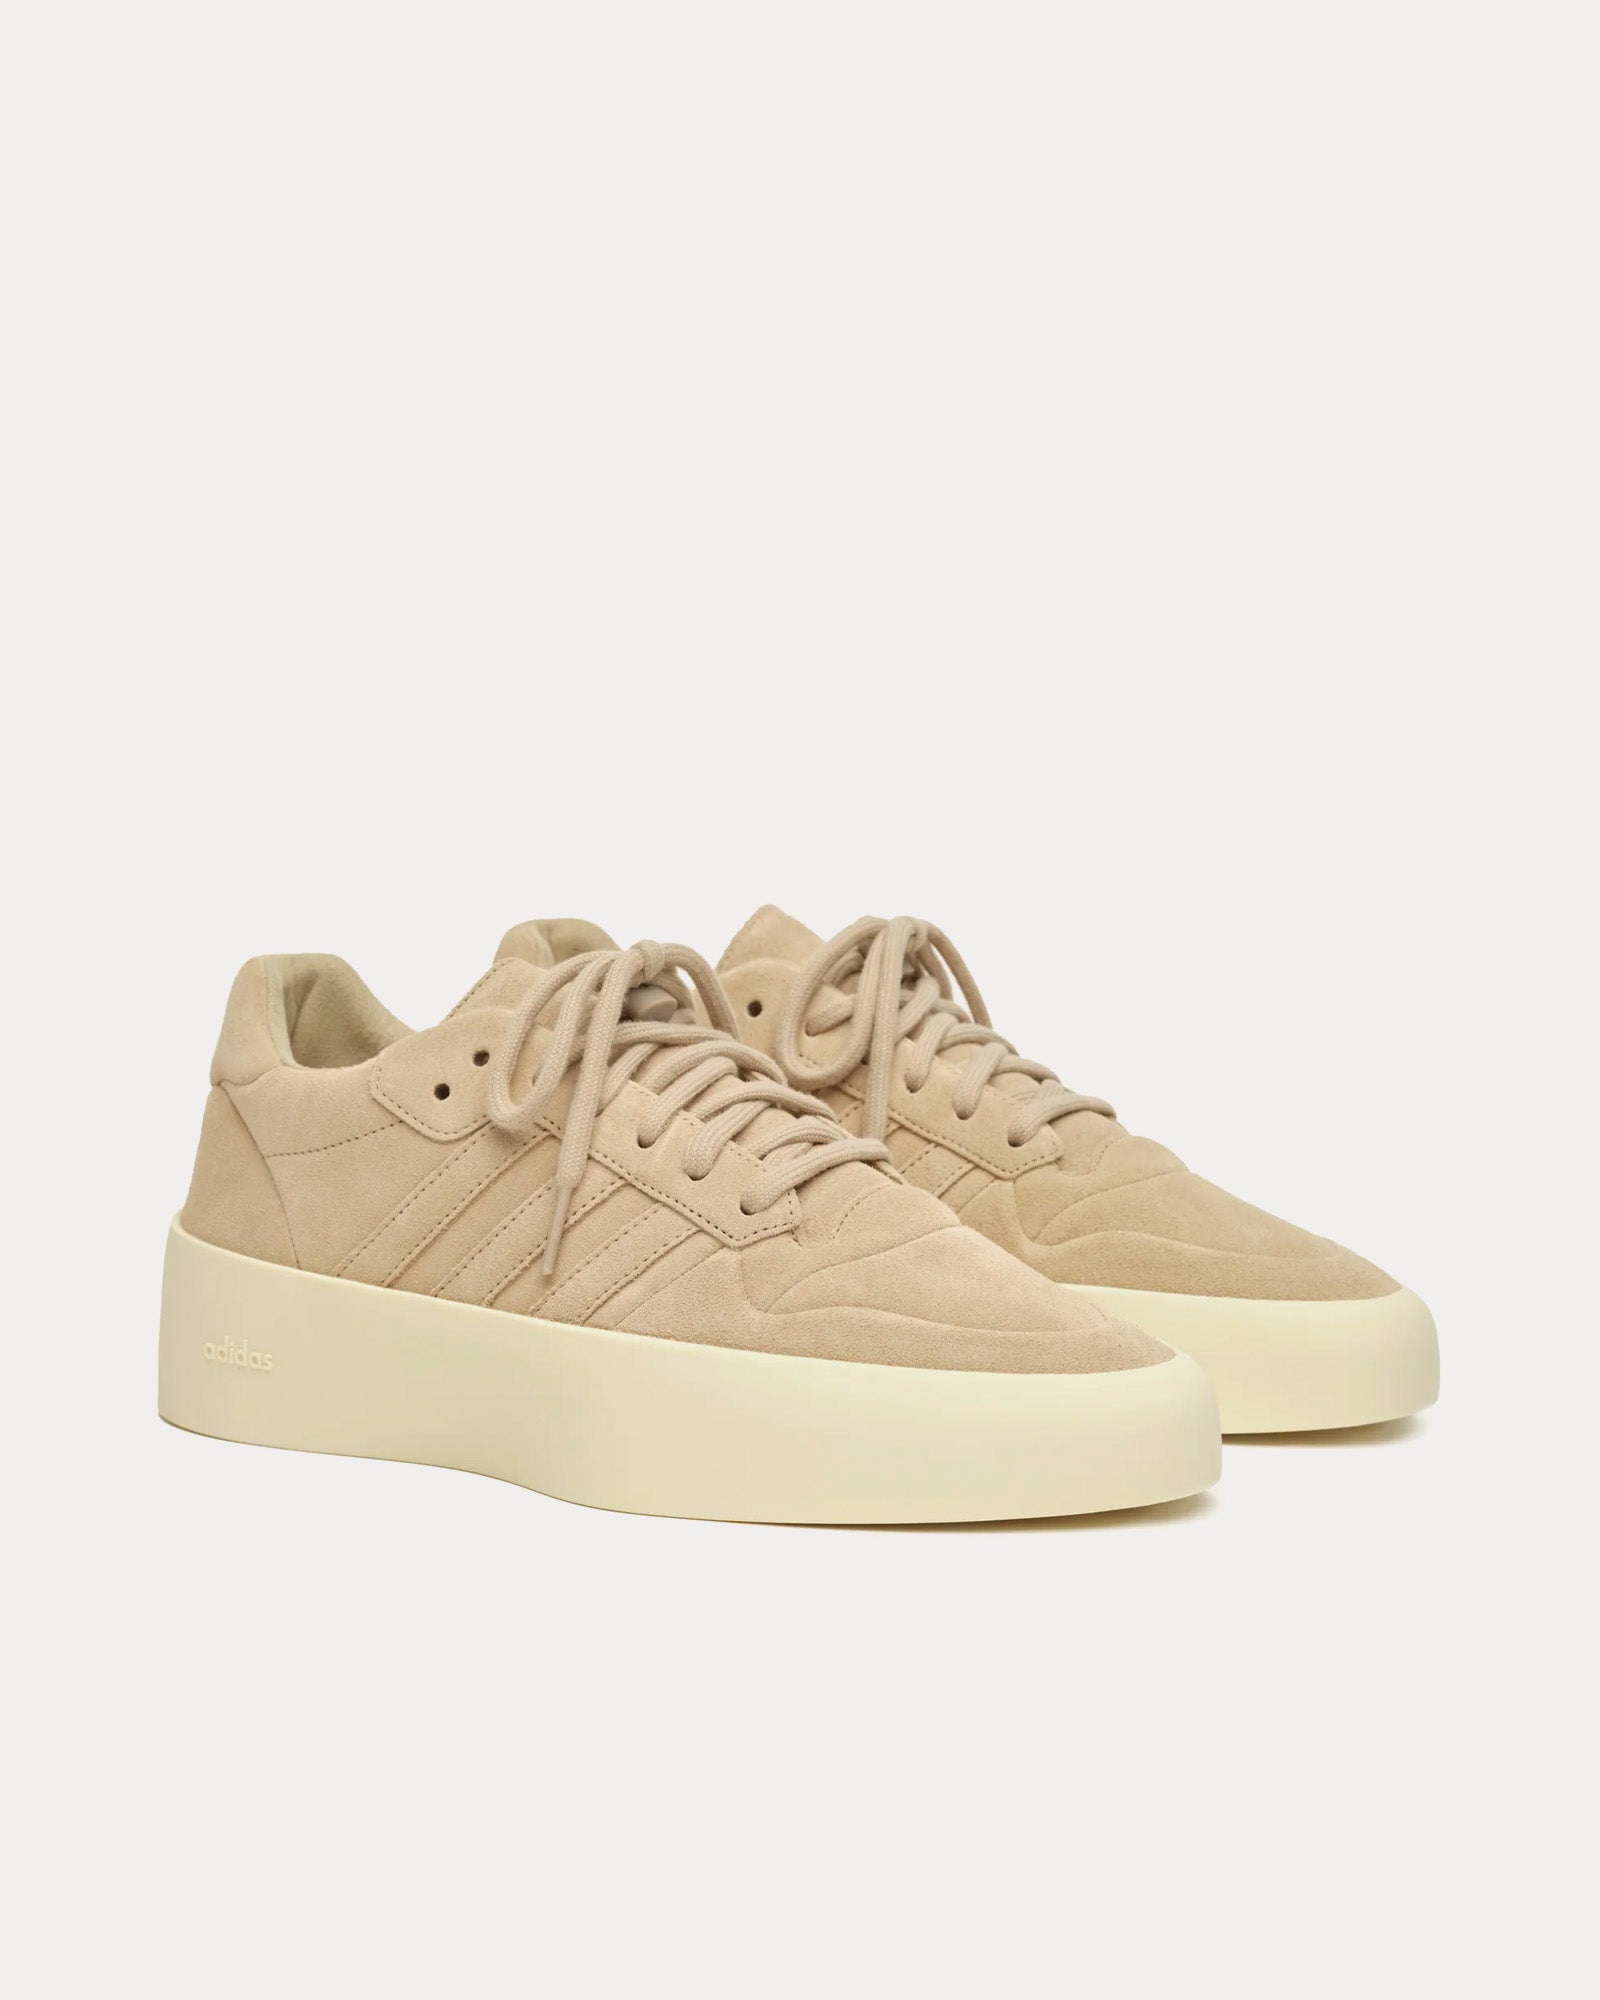 Fear of God Athletics - '86 Lo Clay / Clay Low Top Sneakers